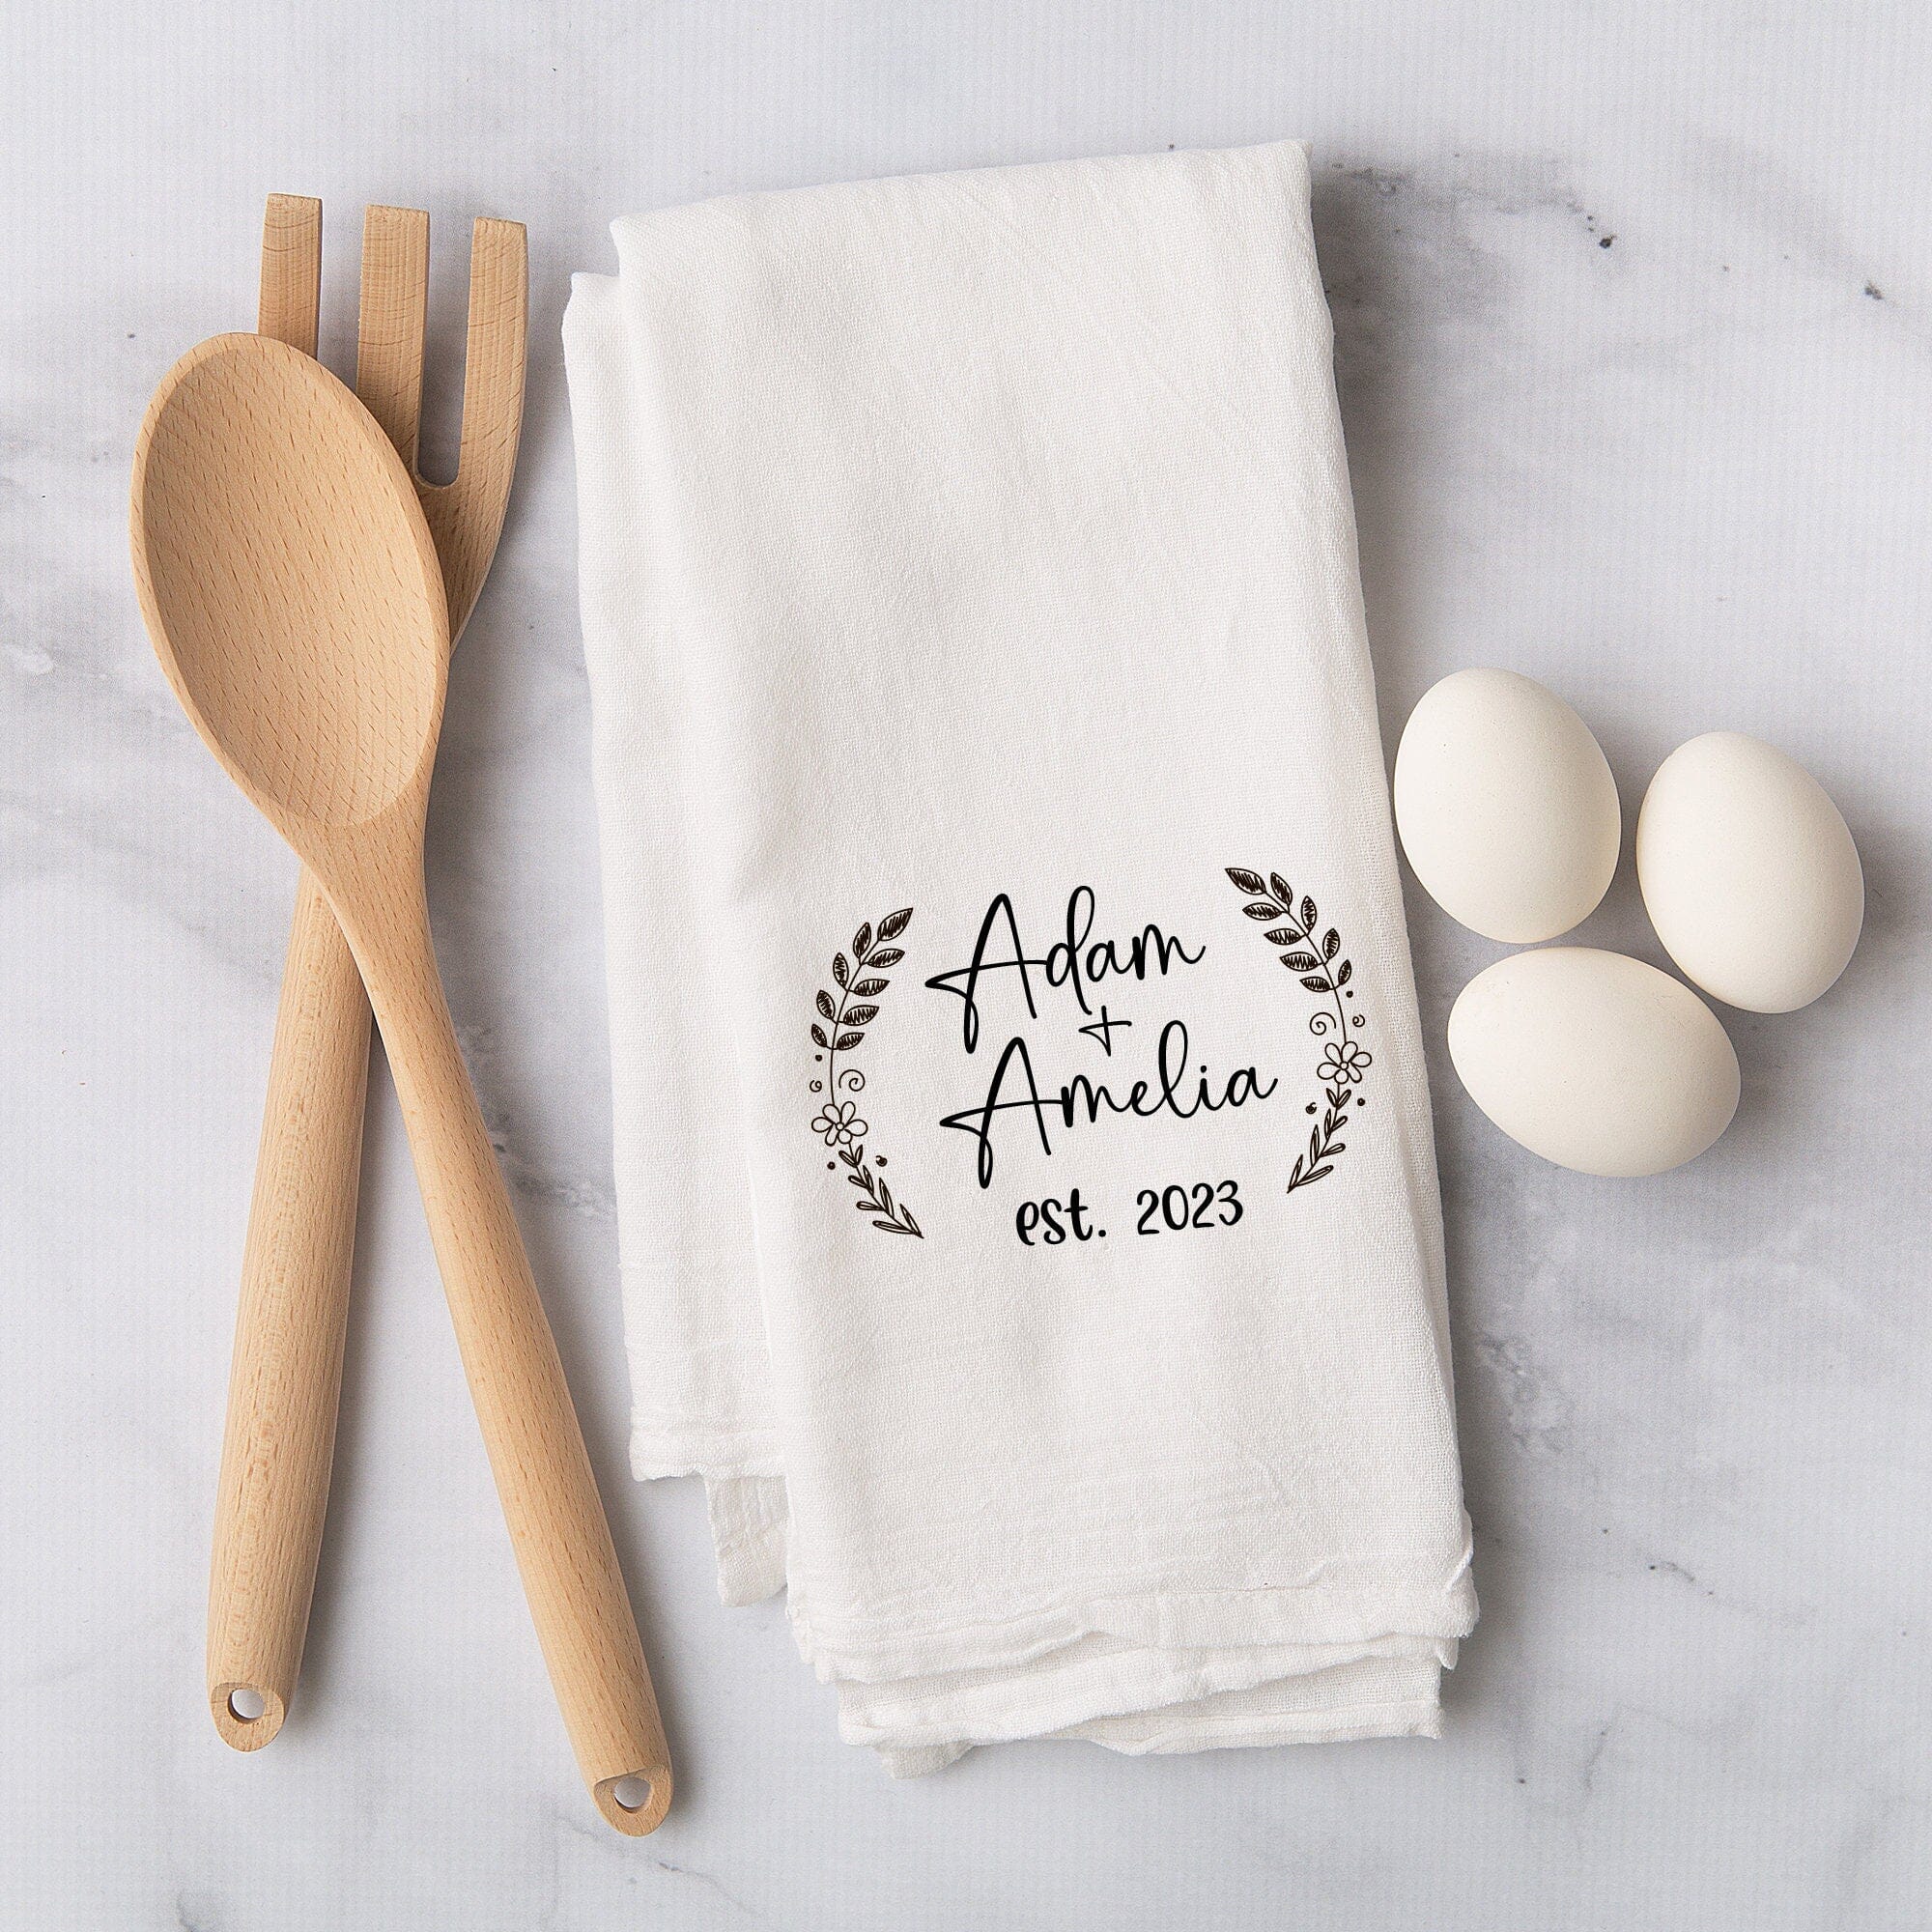 Personalised tea towel with couple name and est date, Engagement gift, Mr and Mrs, Housewarming gift